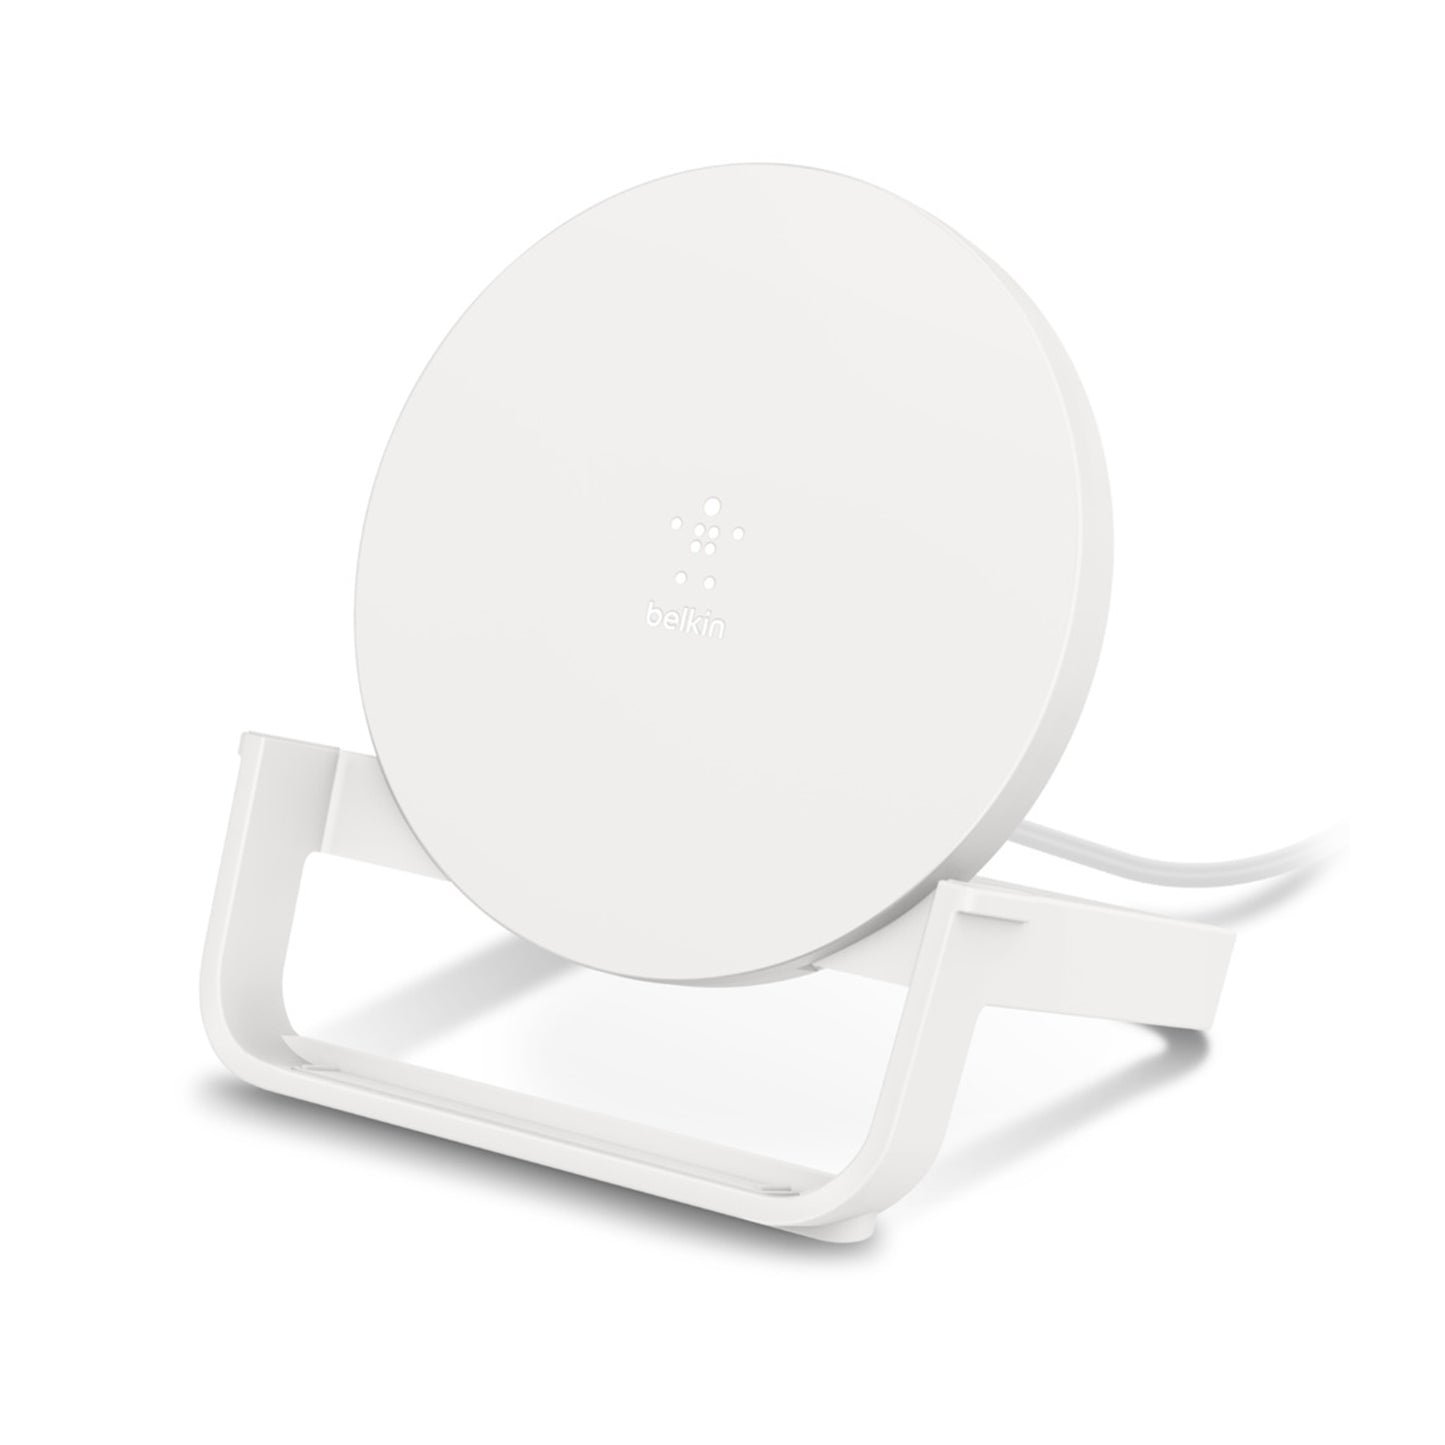 BELKIN BoostUp Charge 10W Wireless Charging Stand - White